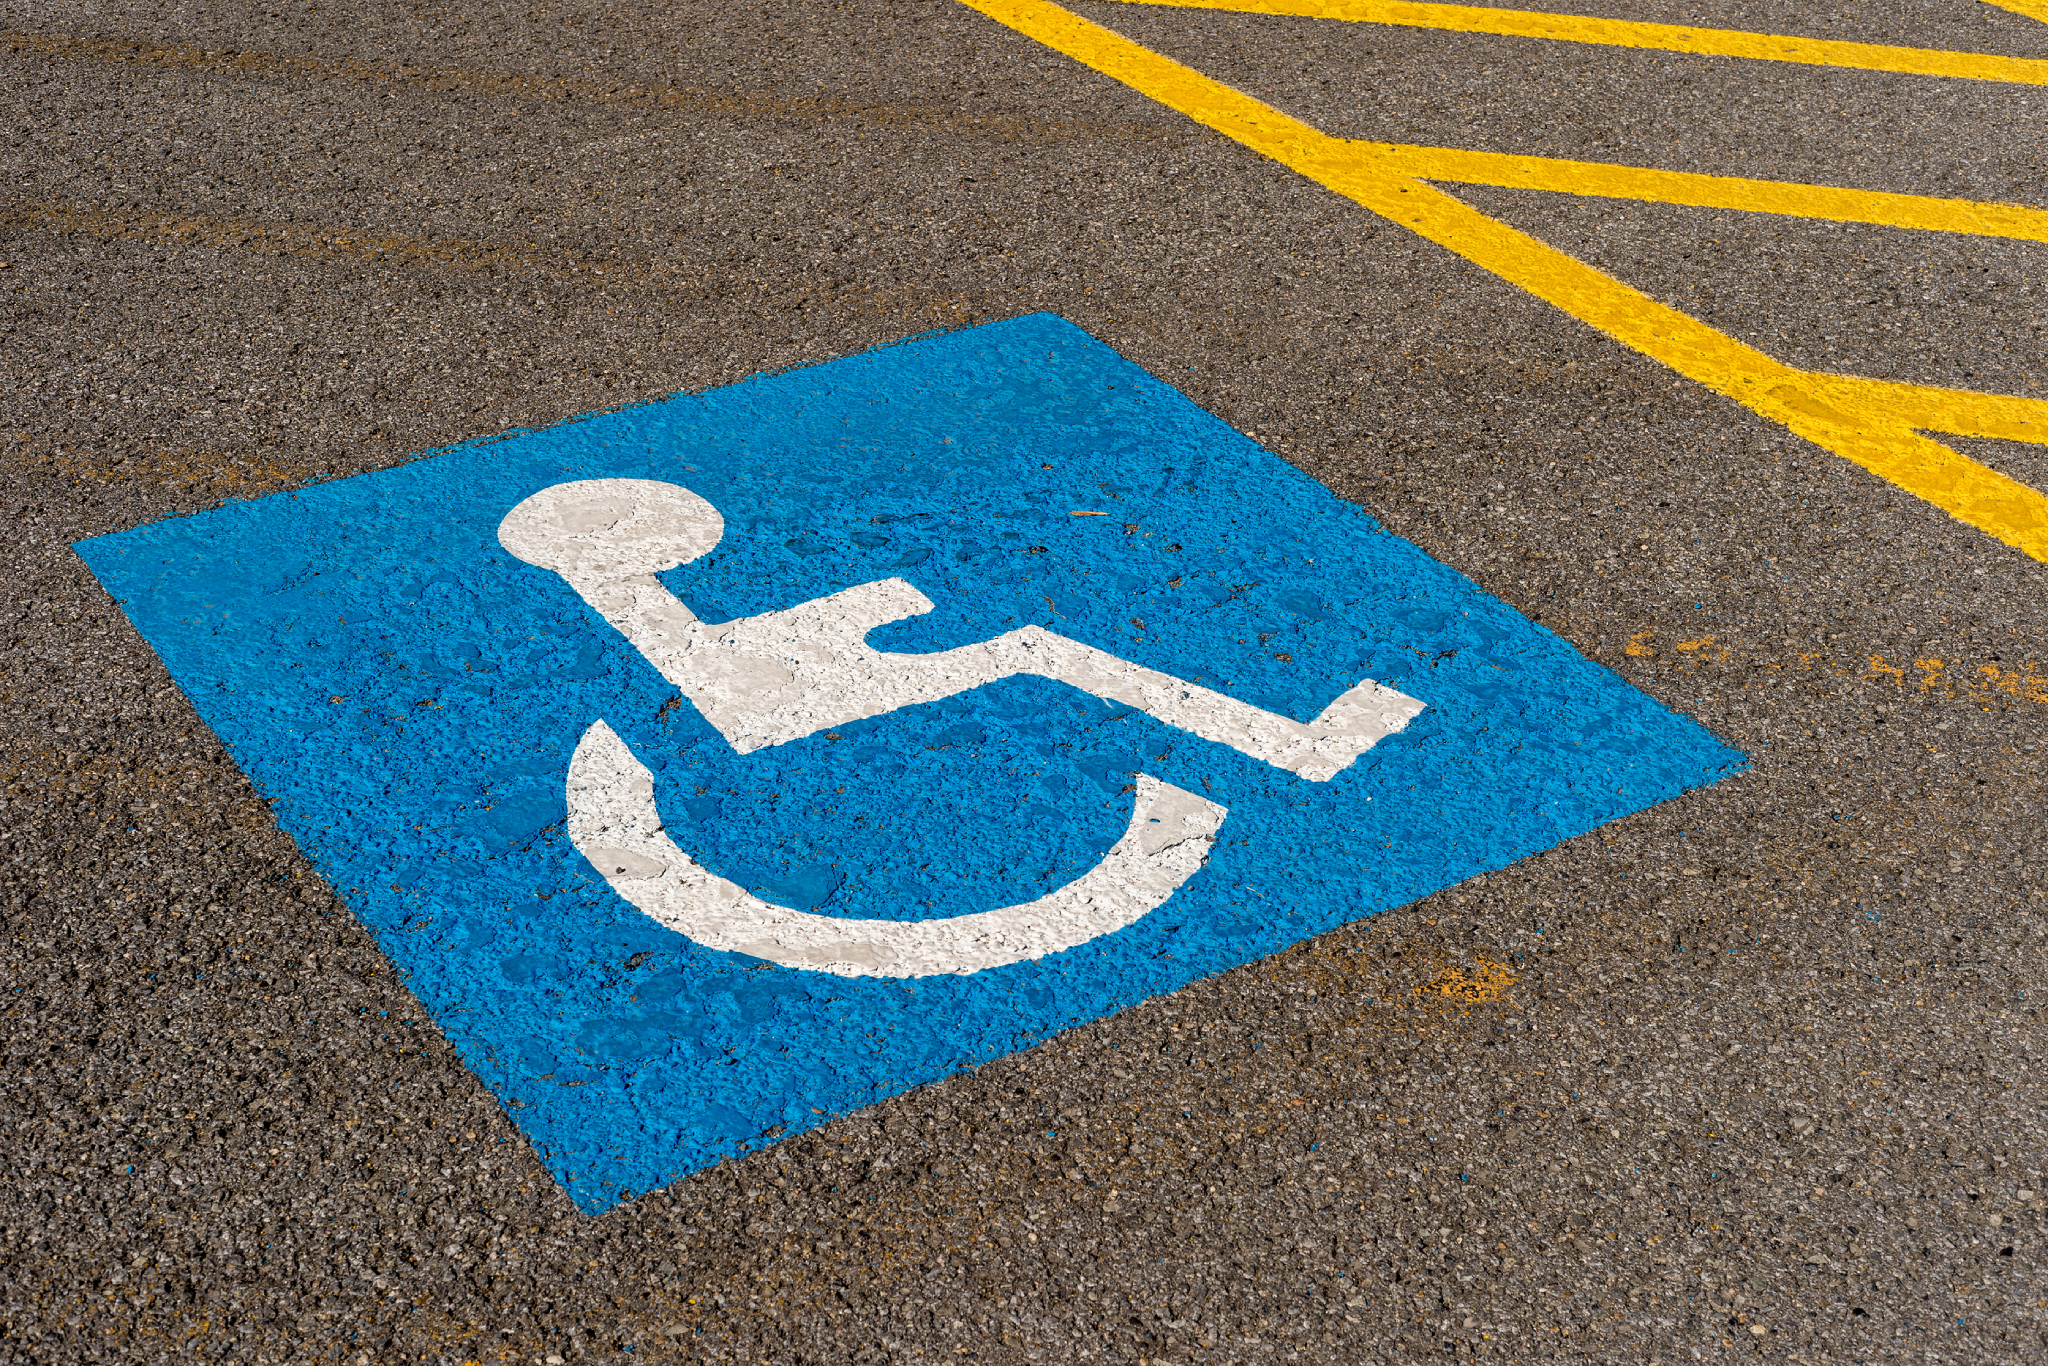 What You Need To Know About ADA Compliance